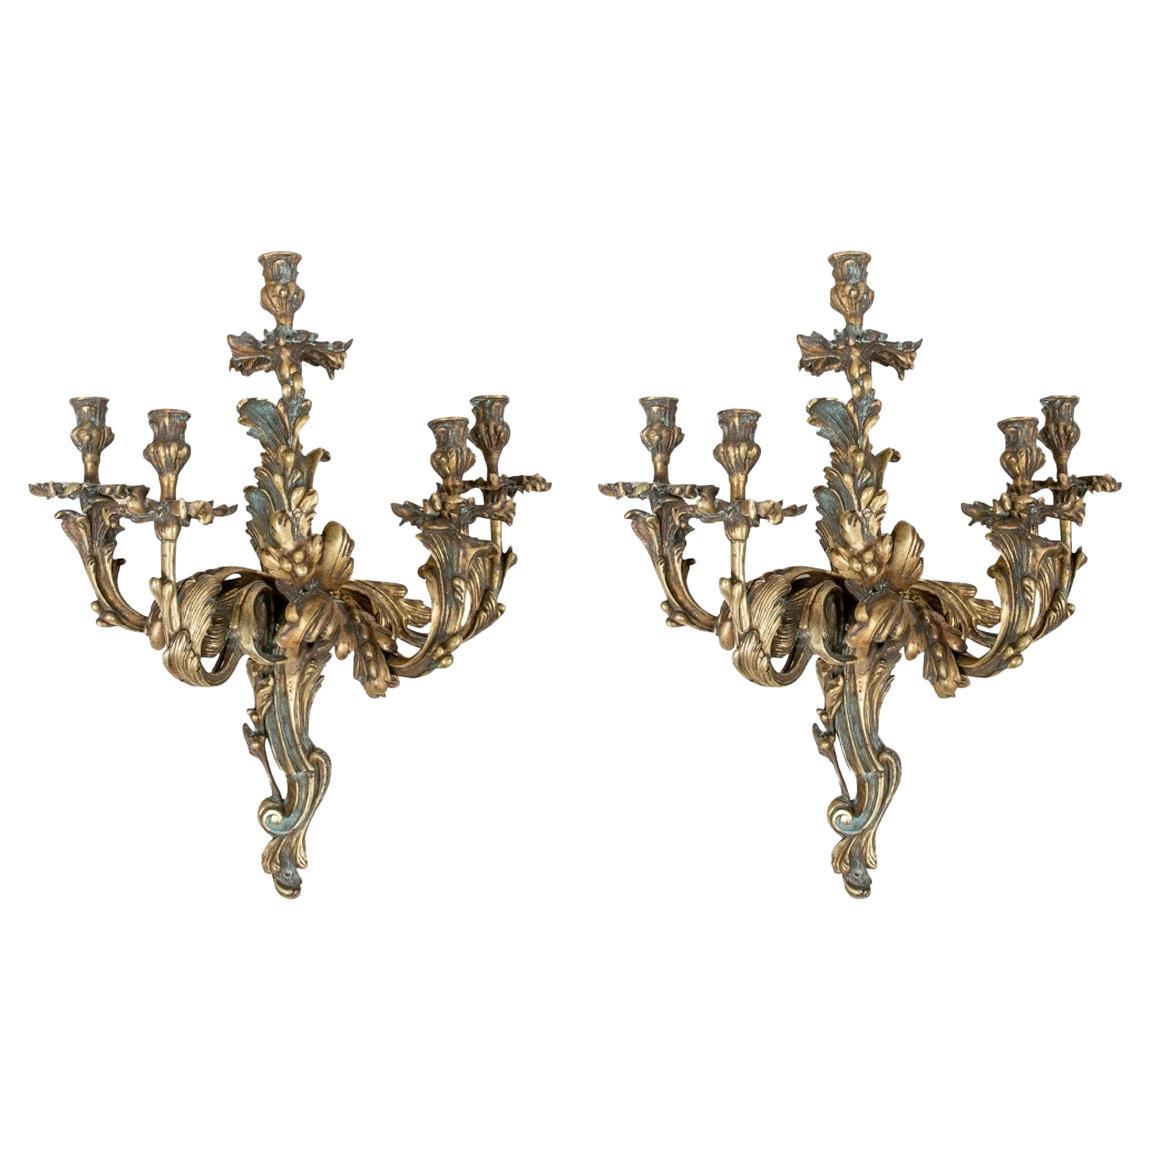 Pair Of Grand 19th C. French Bronze Five Candle Light Sconces For Sale